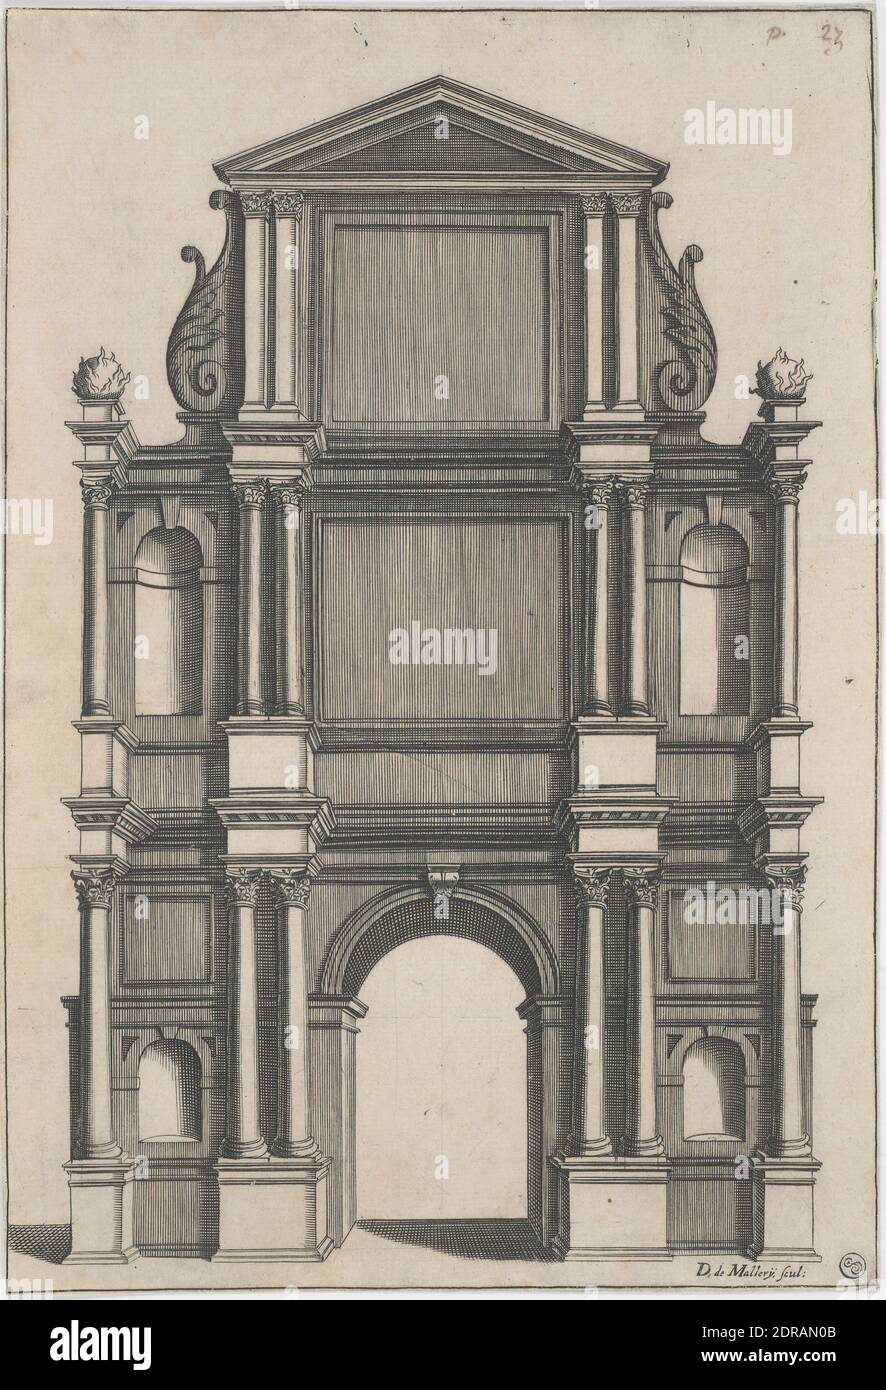 Artist: D. De Mallery, French,, Architectural Design: Facade with Corinthian Columns, 17th century, Engraving, image: 25.5 × 17.4 cm (10 1/16 × 6 7/8 in.), French, possibly 17th century, Works on Paper - Prints Stock Photo